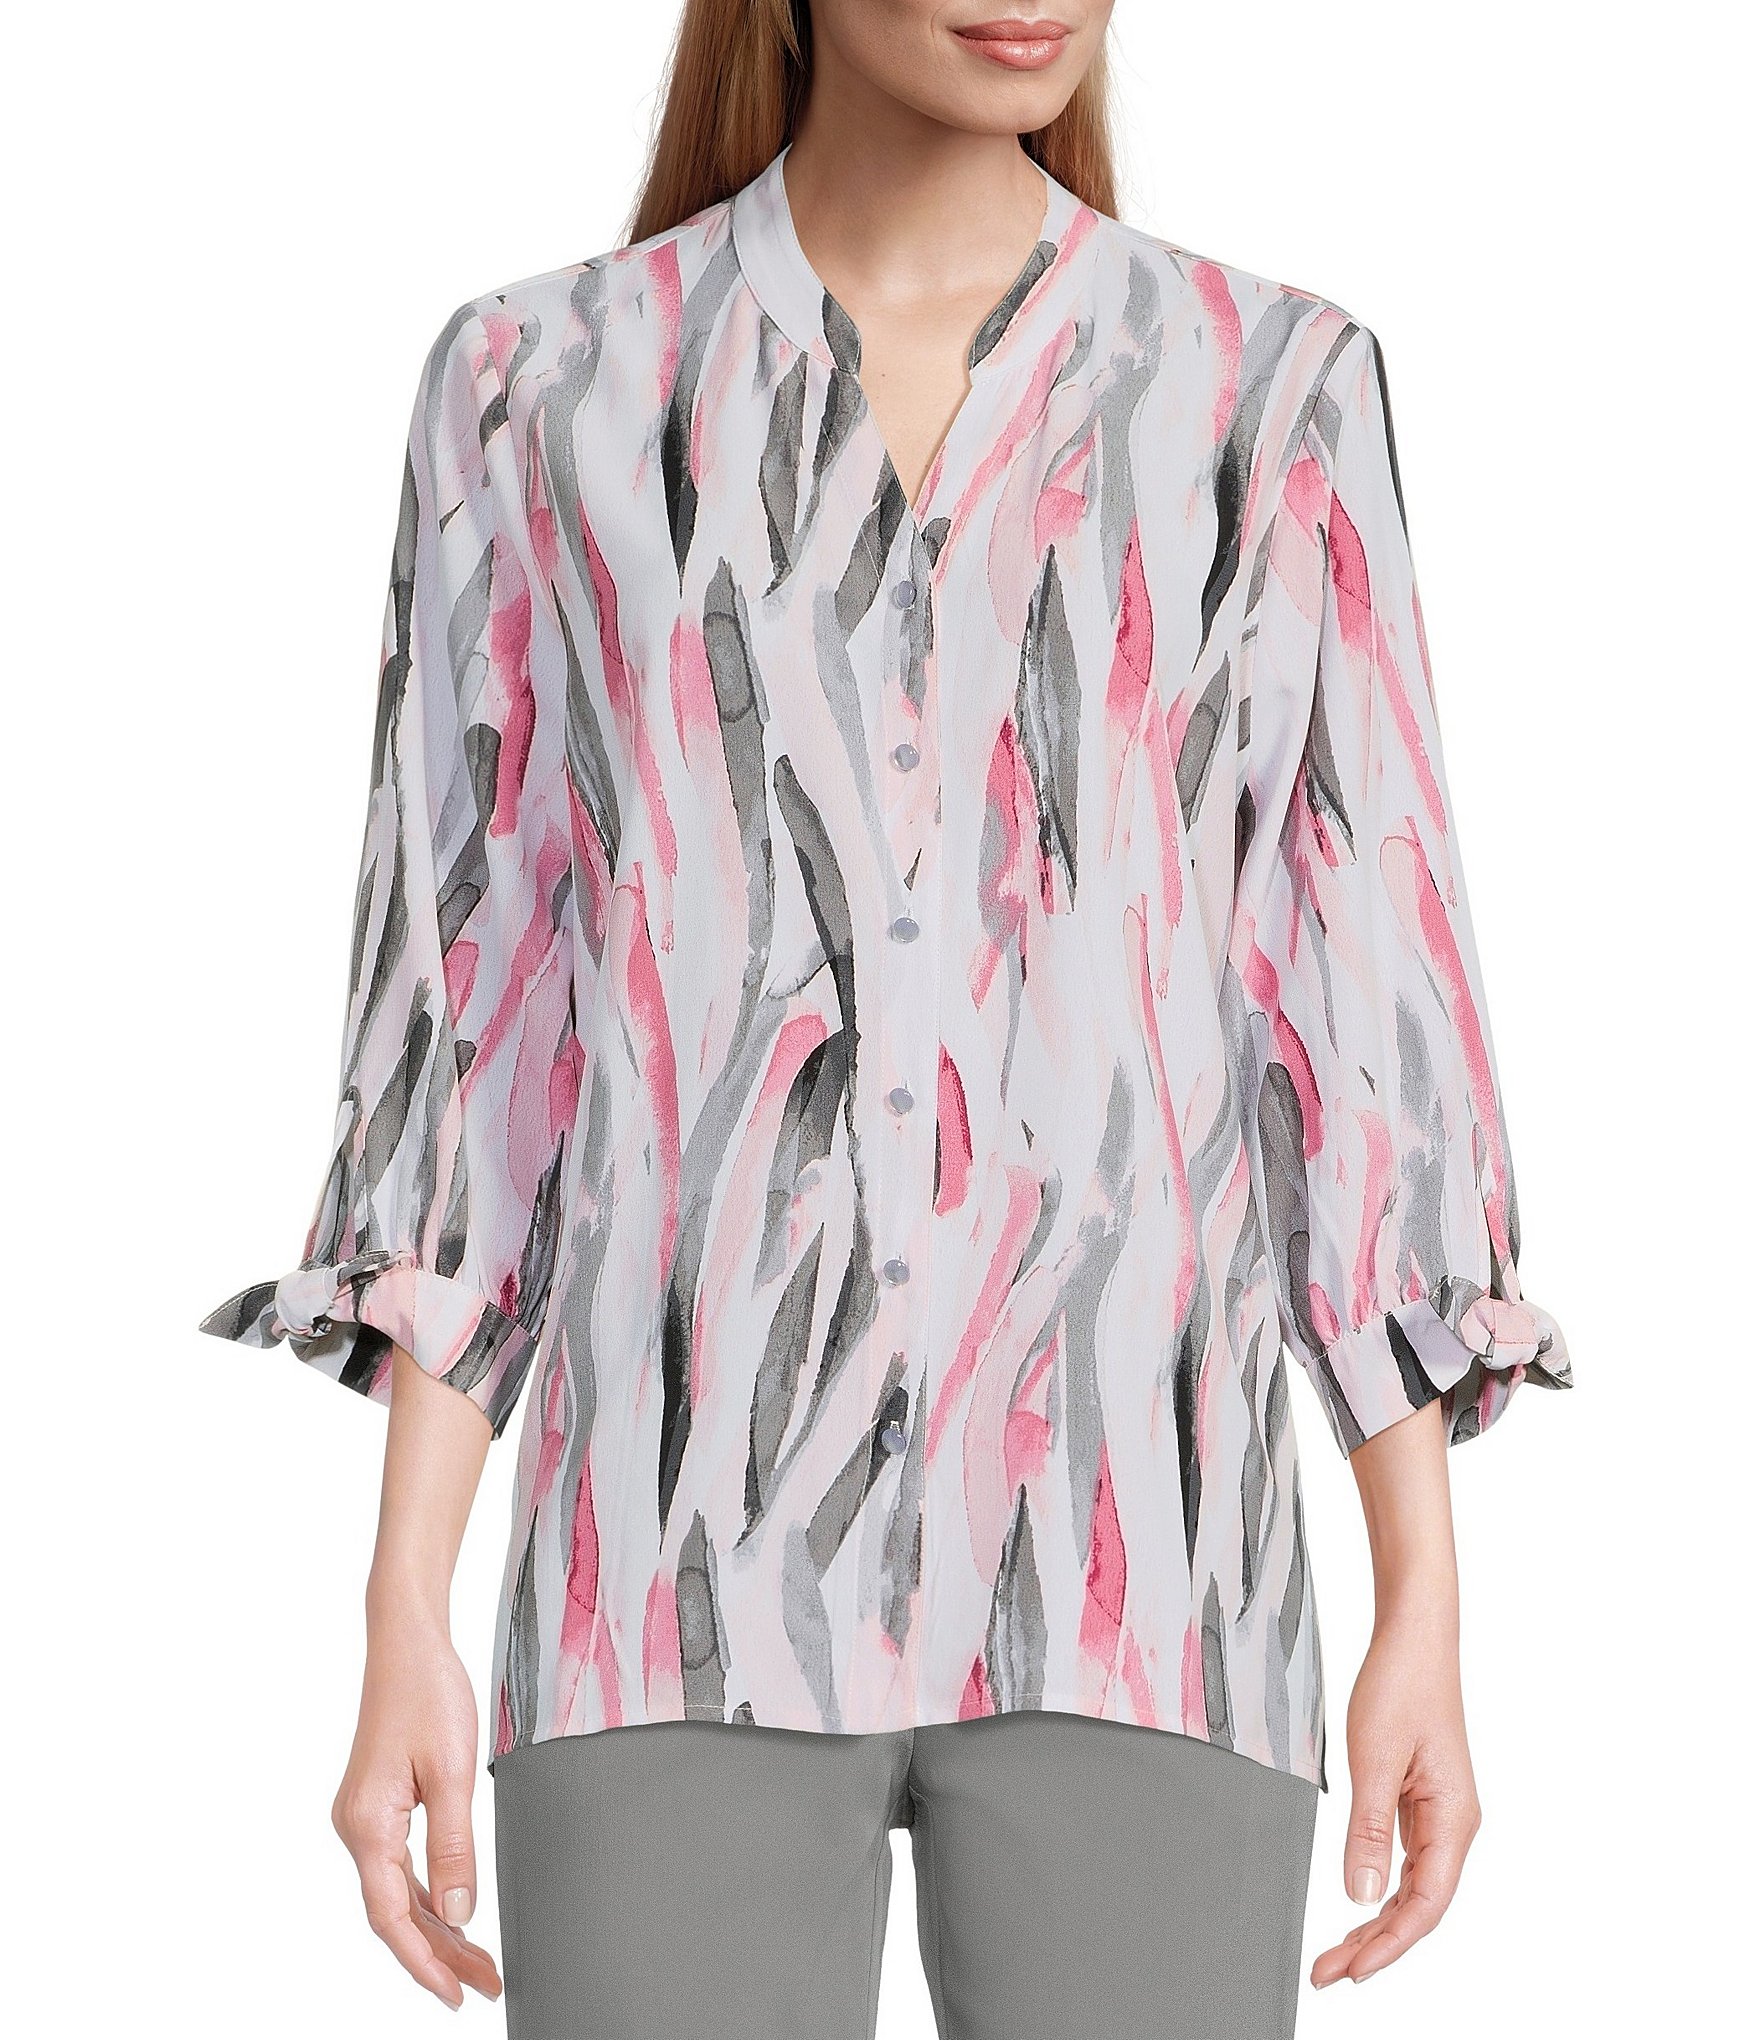 Allison Daley Petite Size Brushed Striped Print 3/4 Tied Sleeve Y-Neck ...